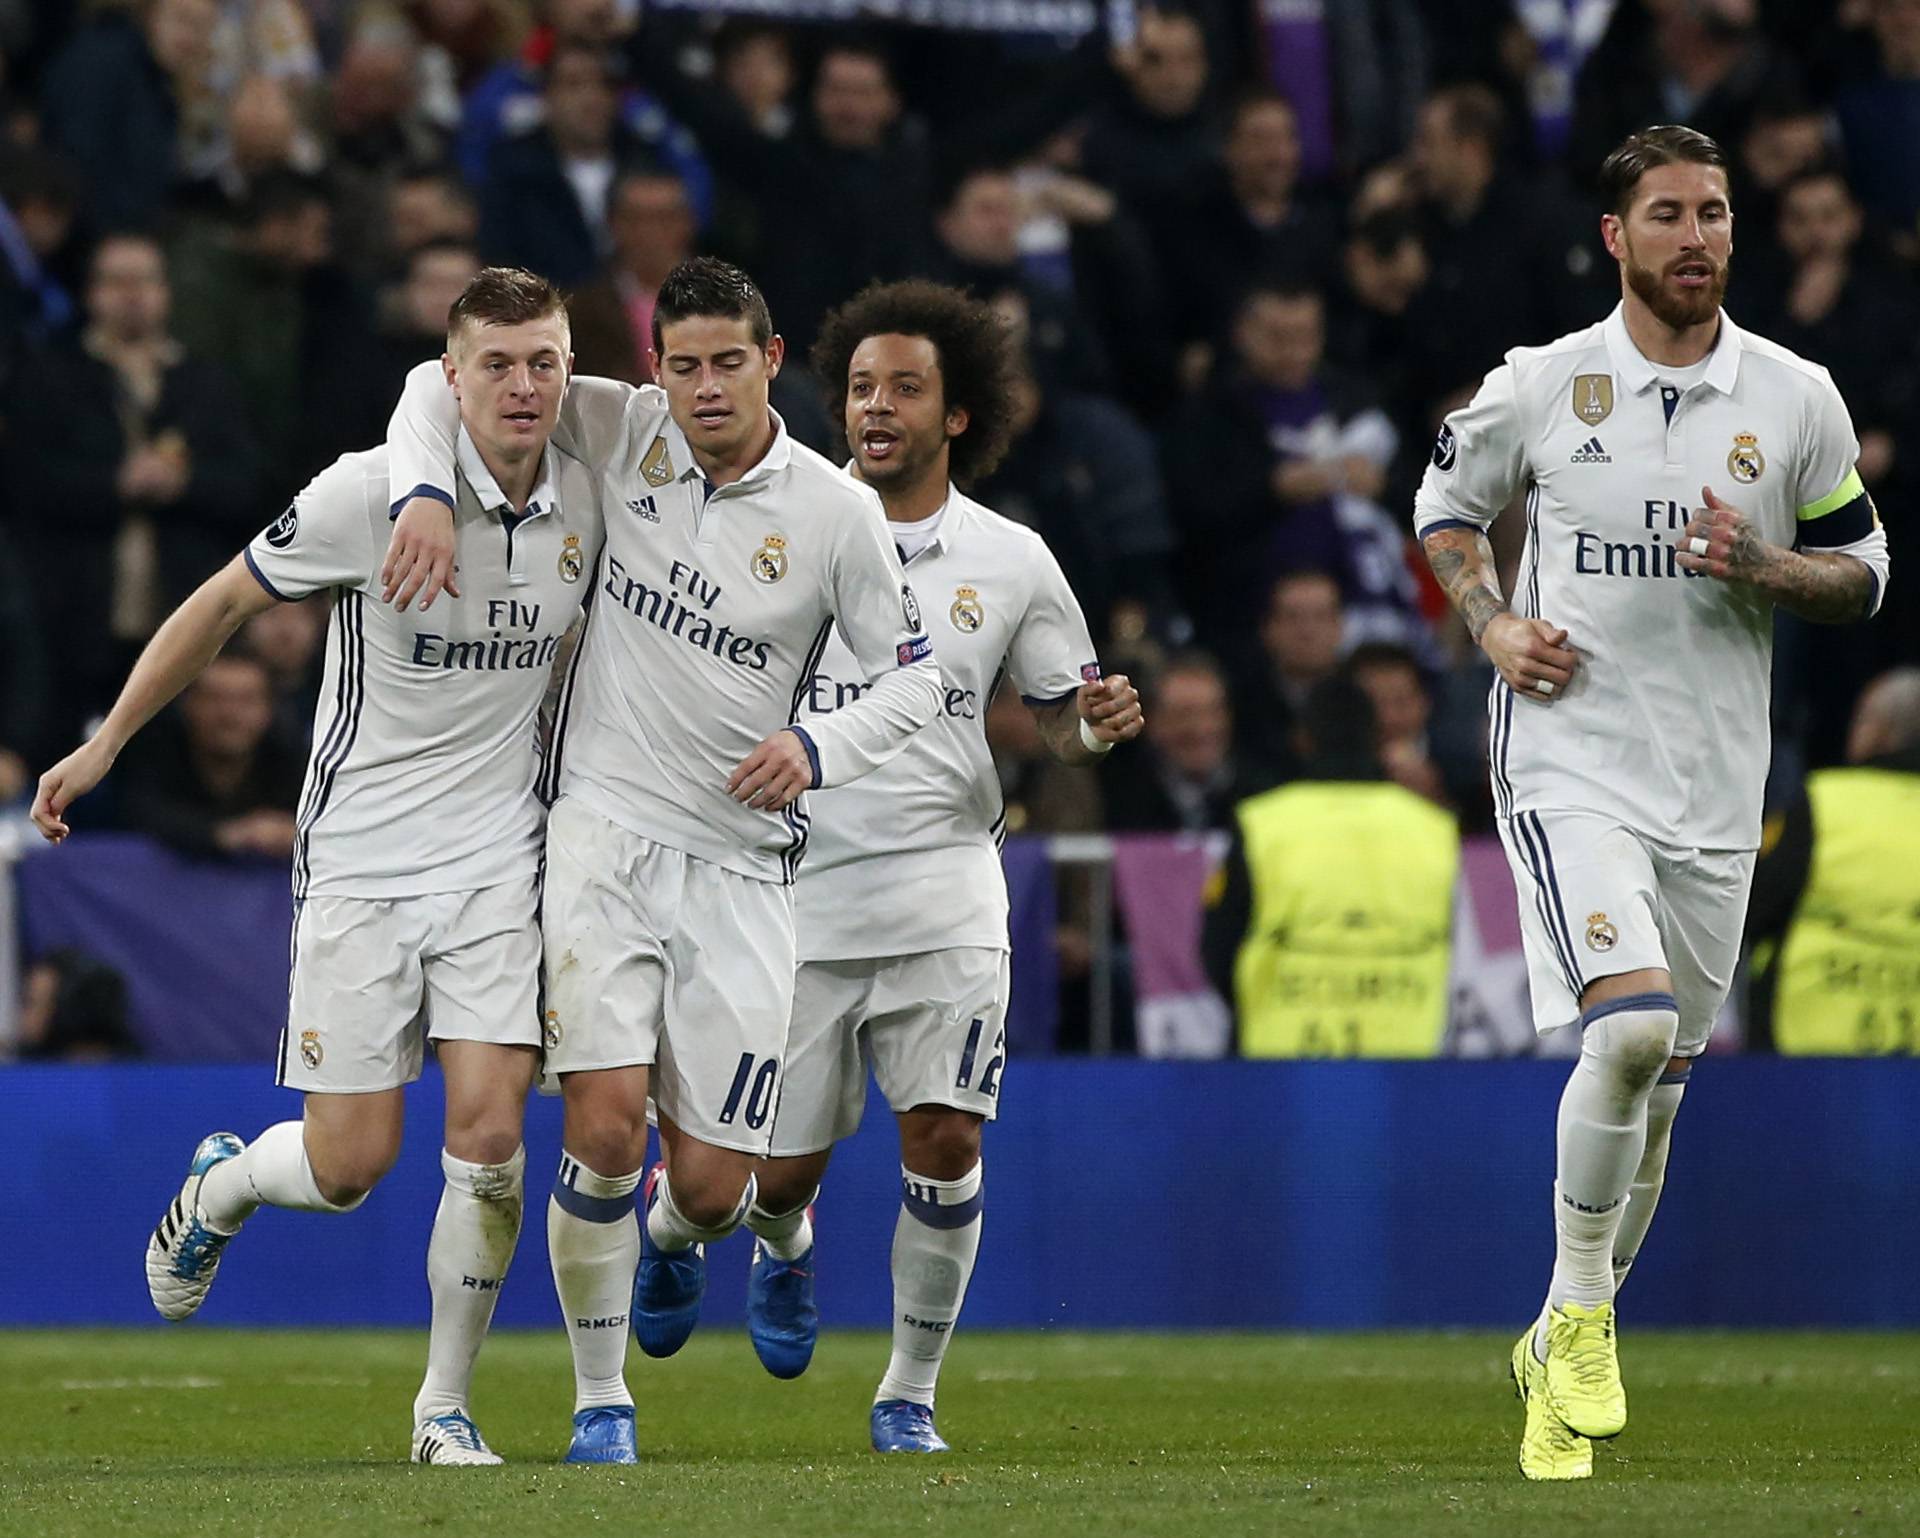 Real Madrid's Toni Kroos celebrates scoring their second goal with James Rodriguez